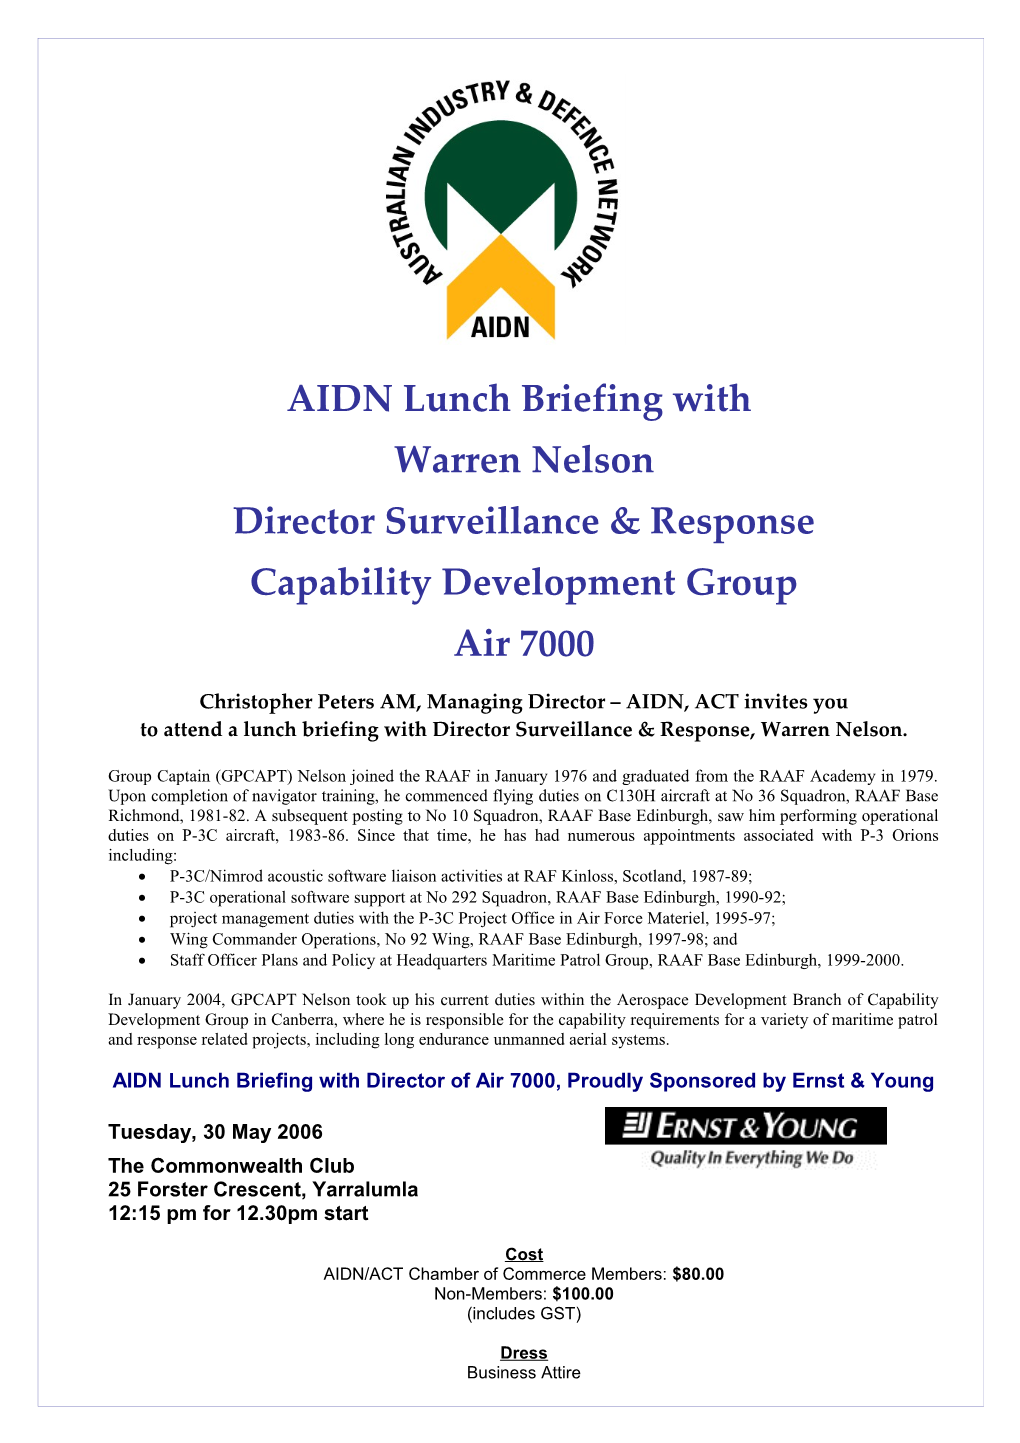 AIDN Lunch Briefing With